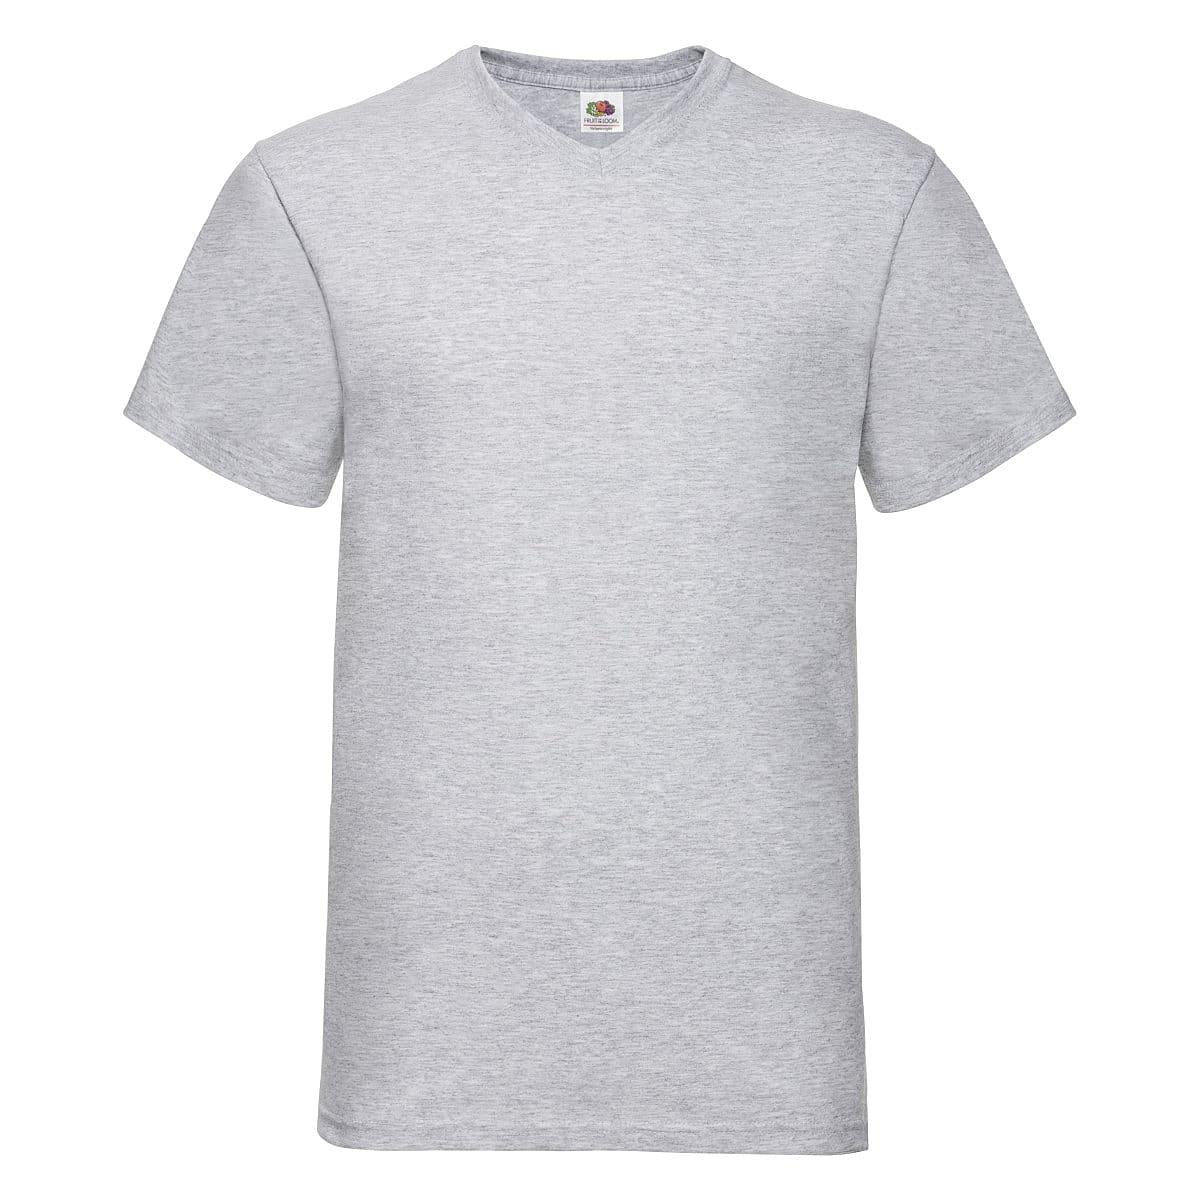 Fruit Of The Loom Valueweight V-Neck T-Shirt in Heather Grey (Product Code: 61066)